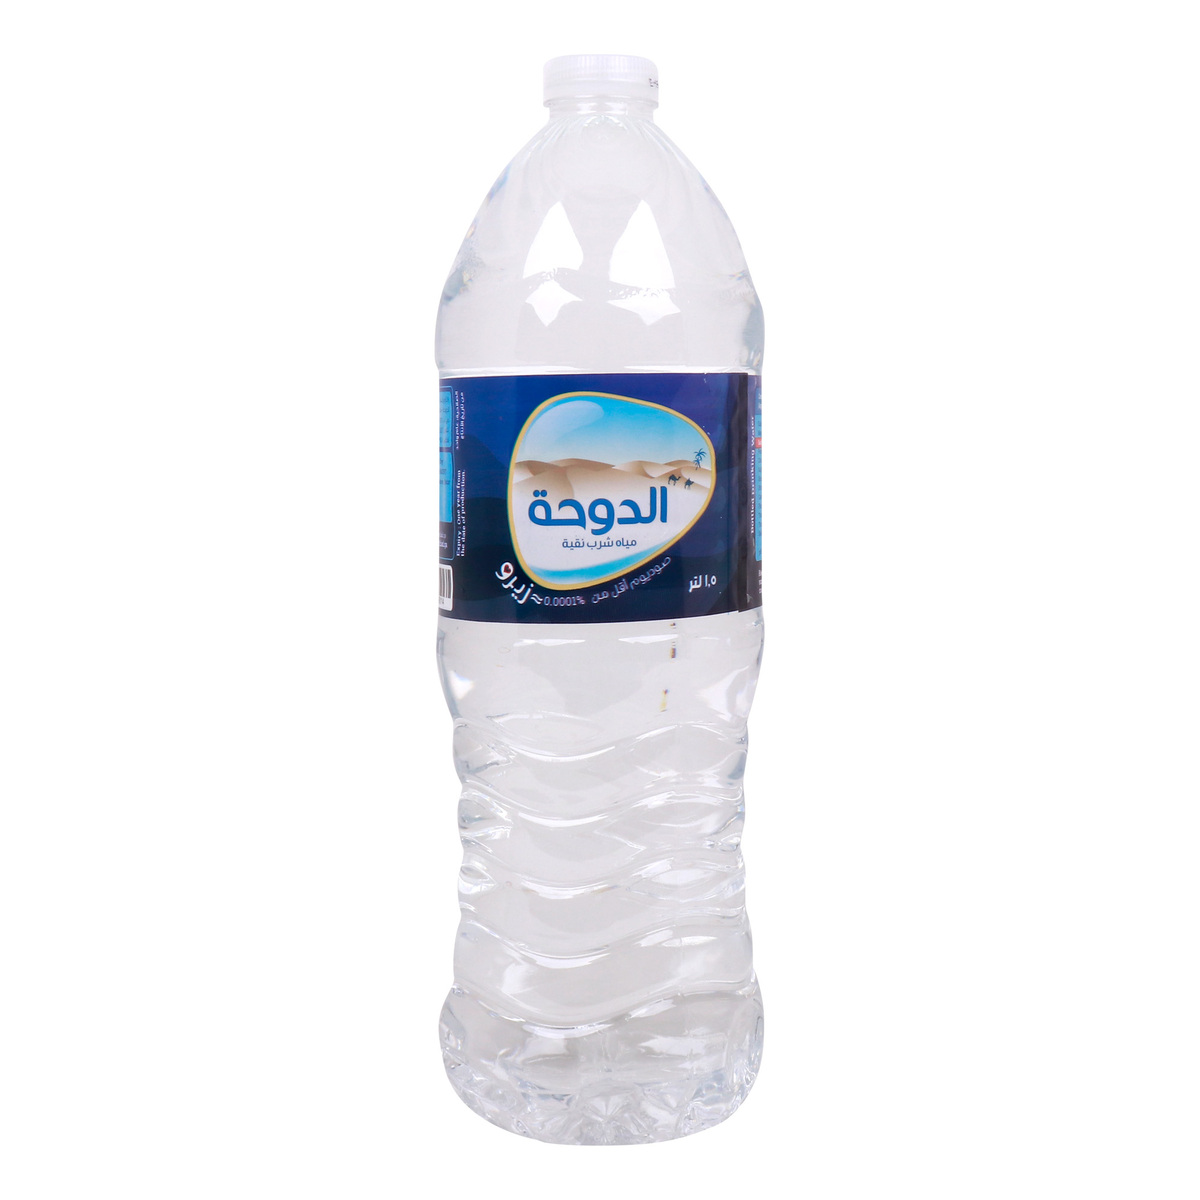 Doha Drinking Water, 1.5 litres